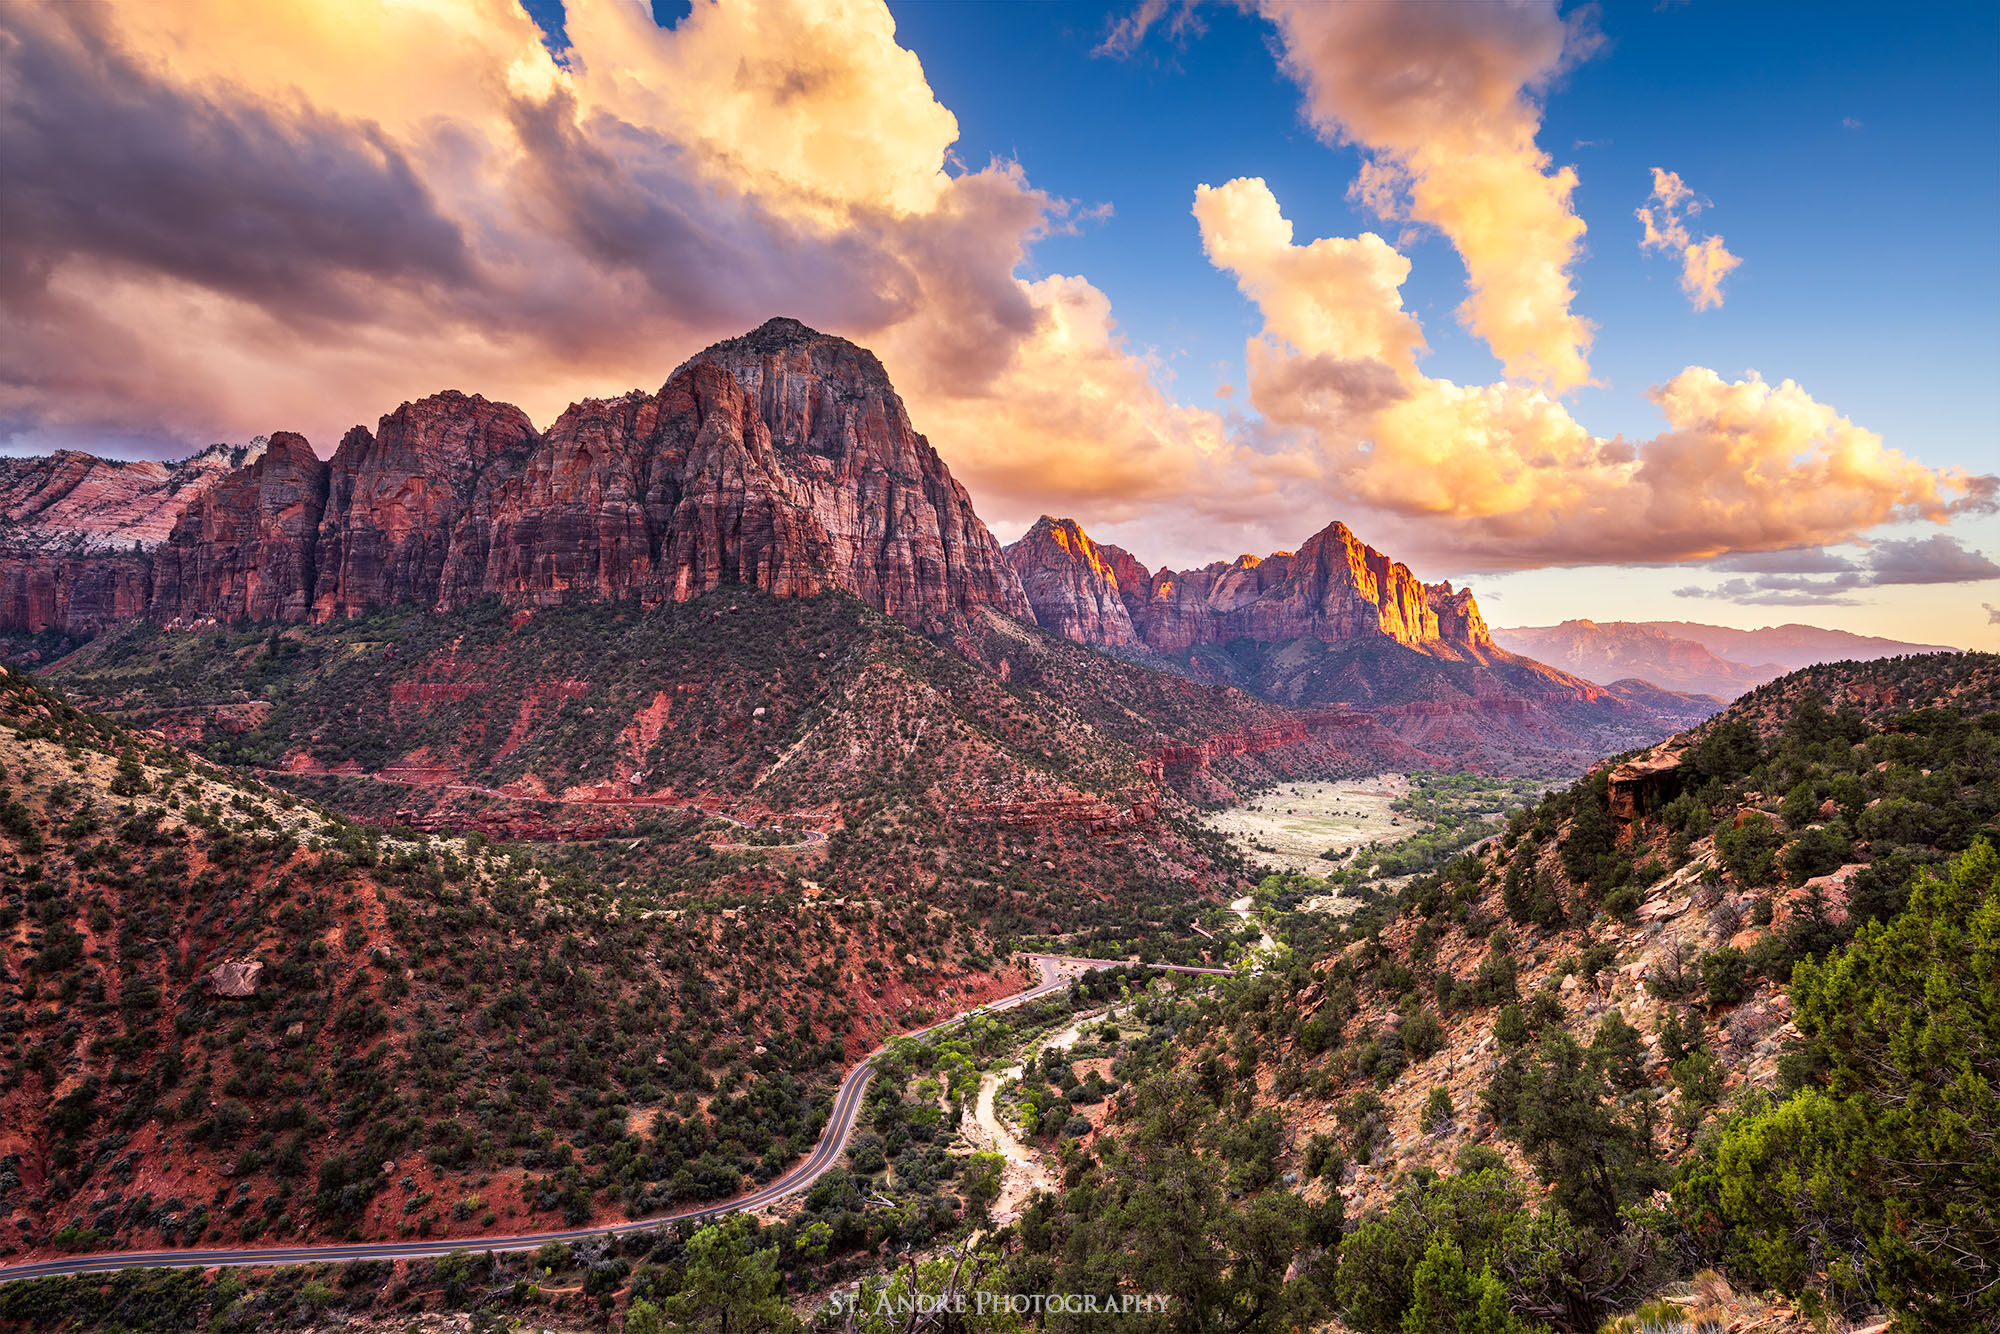 Bridge mountain and the Watchman mountain are lit up at sunset in Zion National Park. The river and road lead the viewer through the scene. 